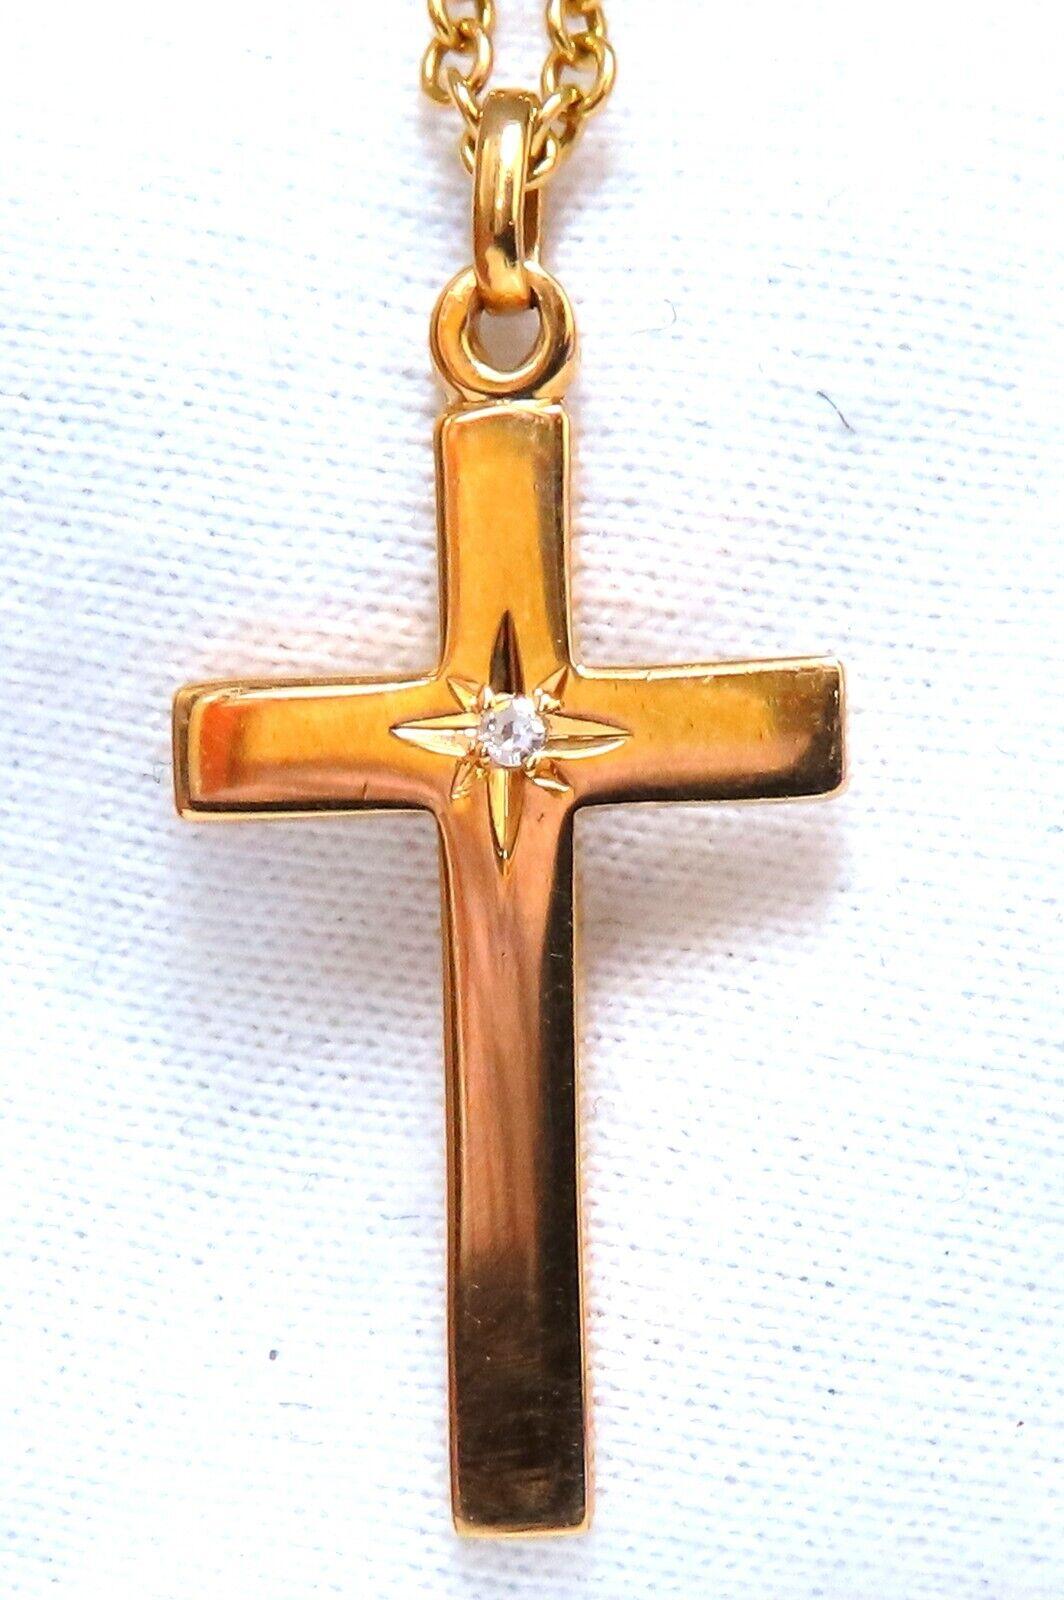 Midsize Gold cross pendant

.05ct diamond

H-color Vs-2 clarity

14kt. Yellow gold. 4.8grams.

cross total measurement: 23 x 14mm 

Necklace: 14 inch 

14kt yellow gold